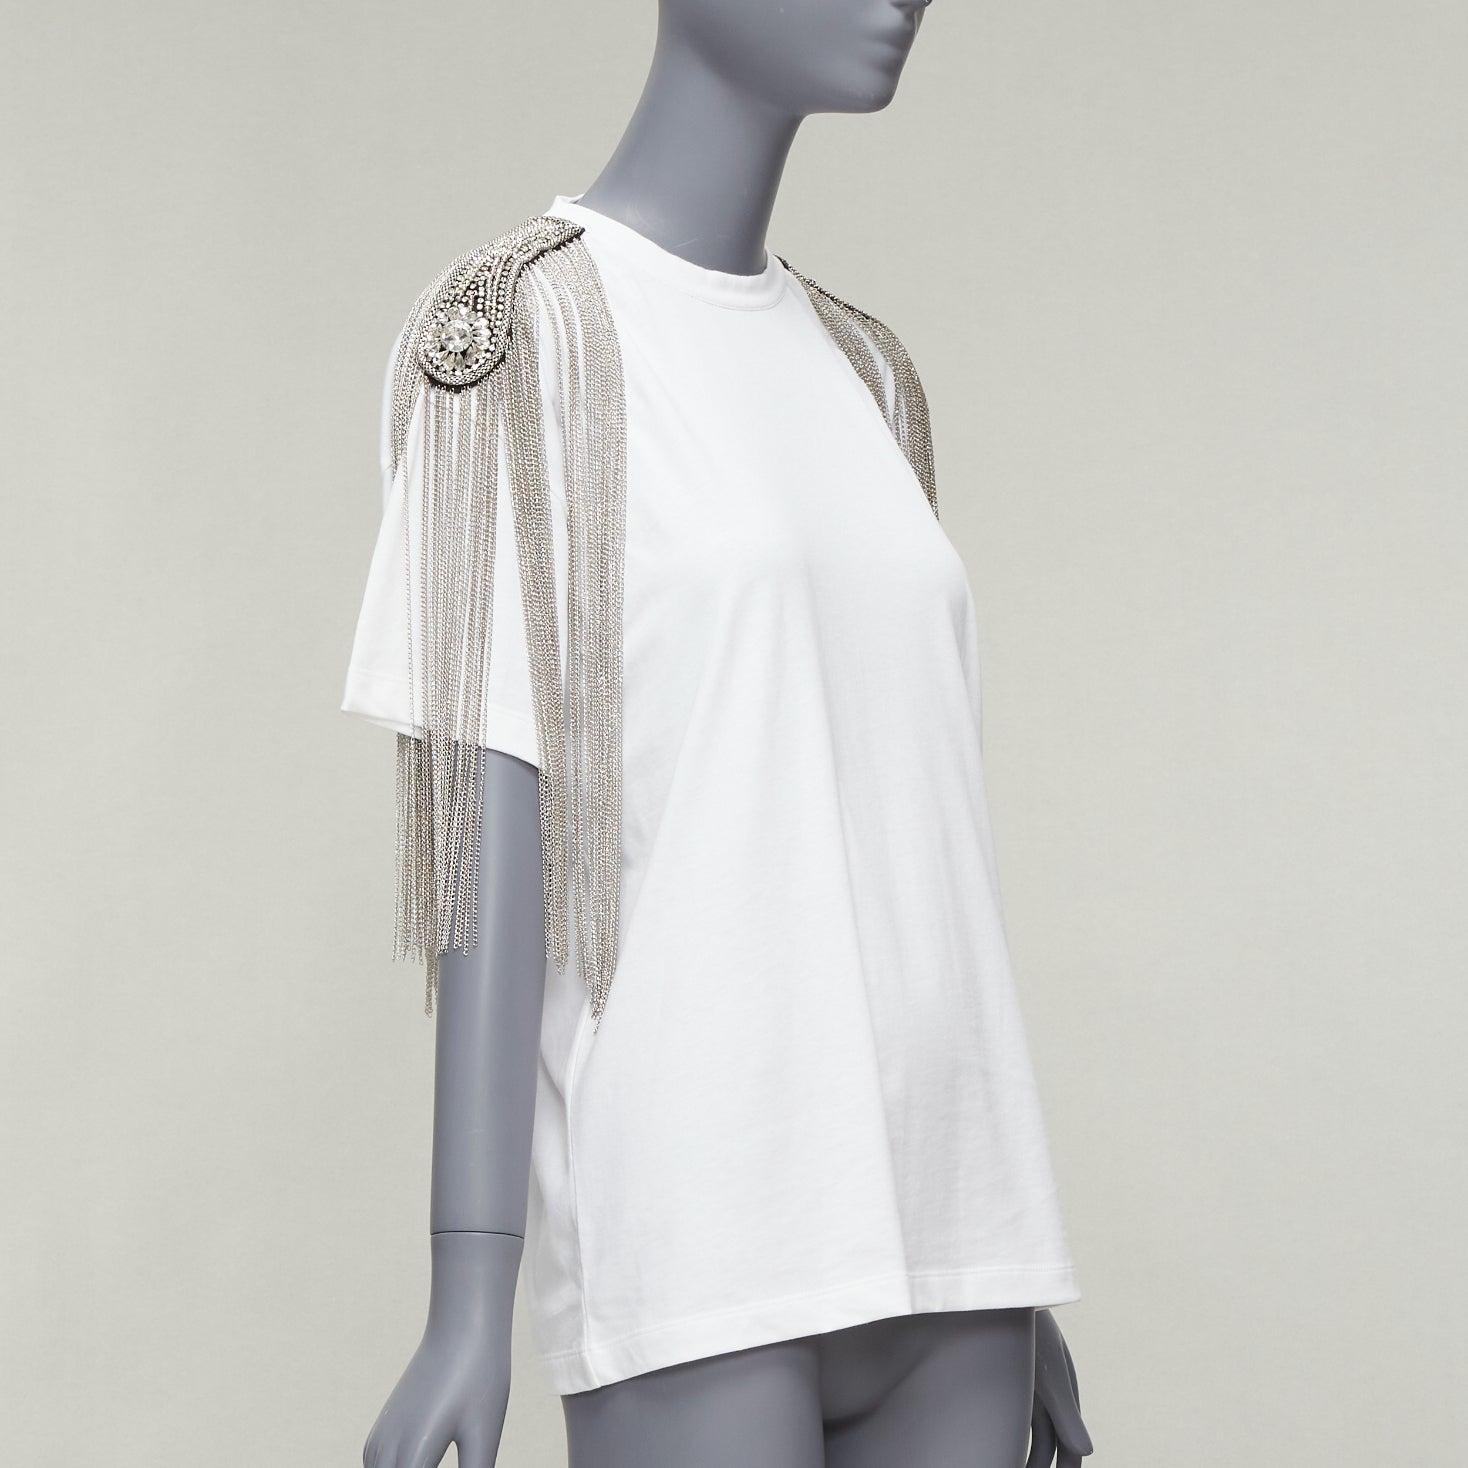 CHRISTOPHER KANE white military silver chain embellished shoulder tshirt XS
Reference: AAWC/A00666
Brand: Christopher Kane
Material: Cotton, Metal
Color: White, Silver
Pattern: Solid
Closure: Zip
Extra Details: Featuring short sleeves, a round neck,